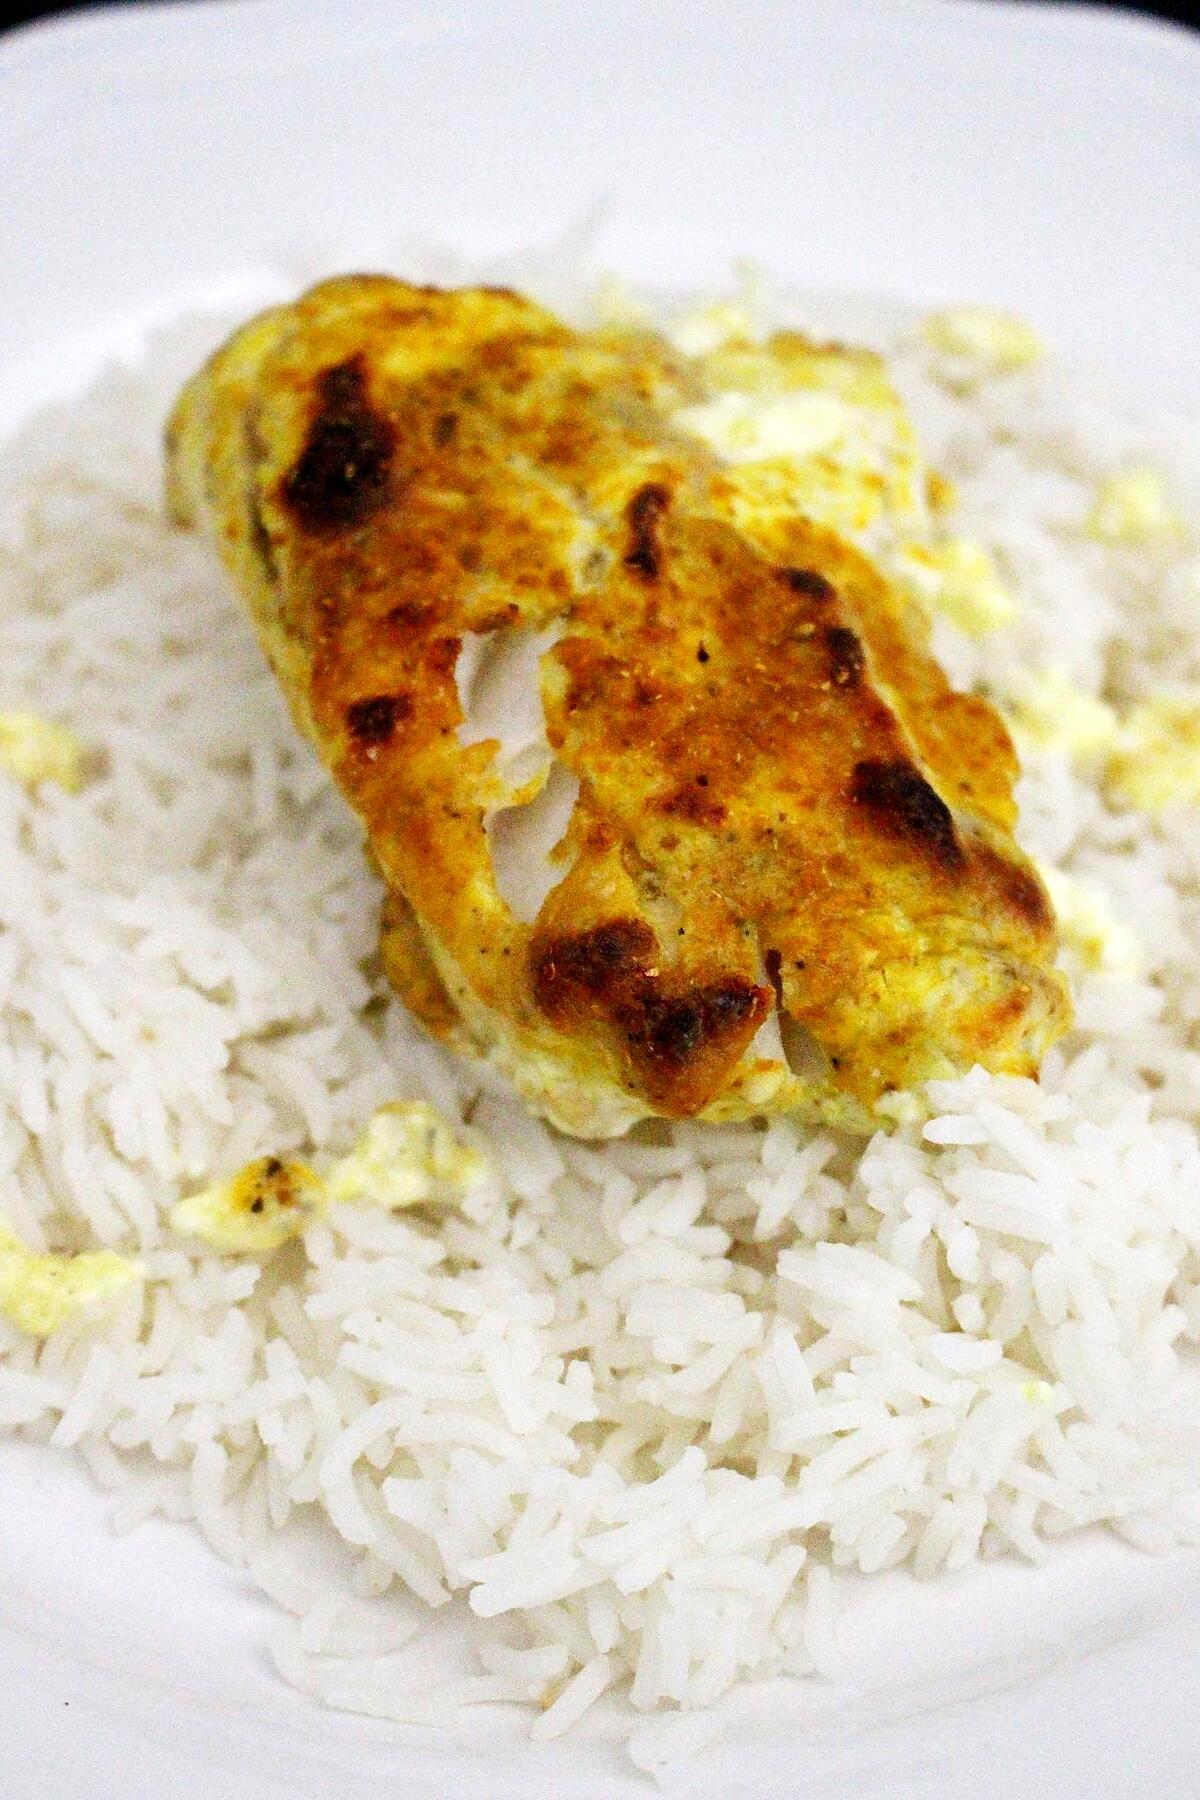 recette Poisson Moutarde Curry